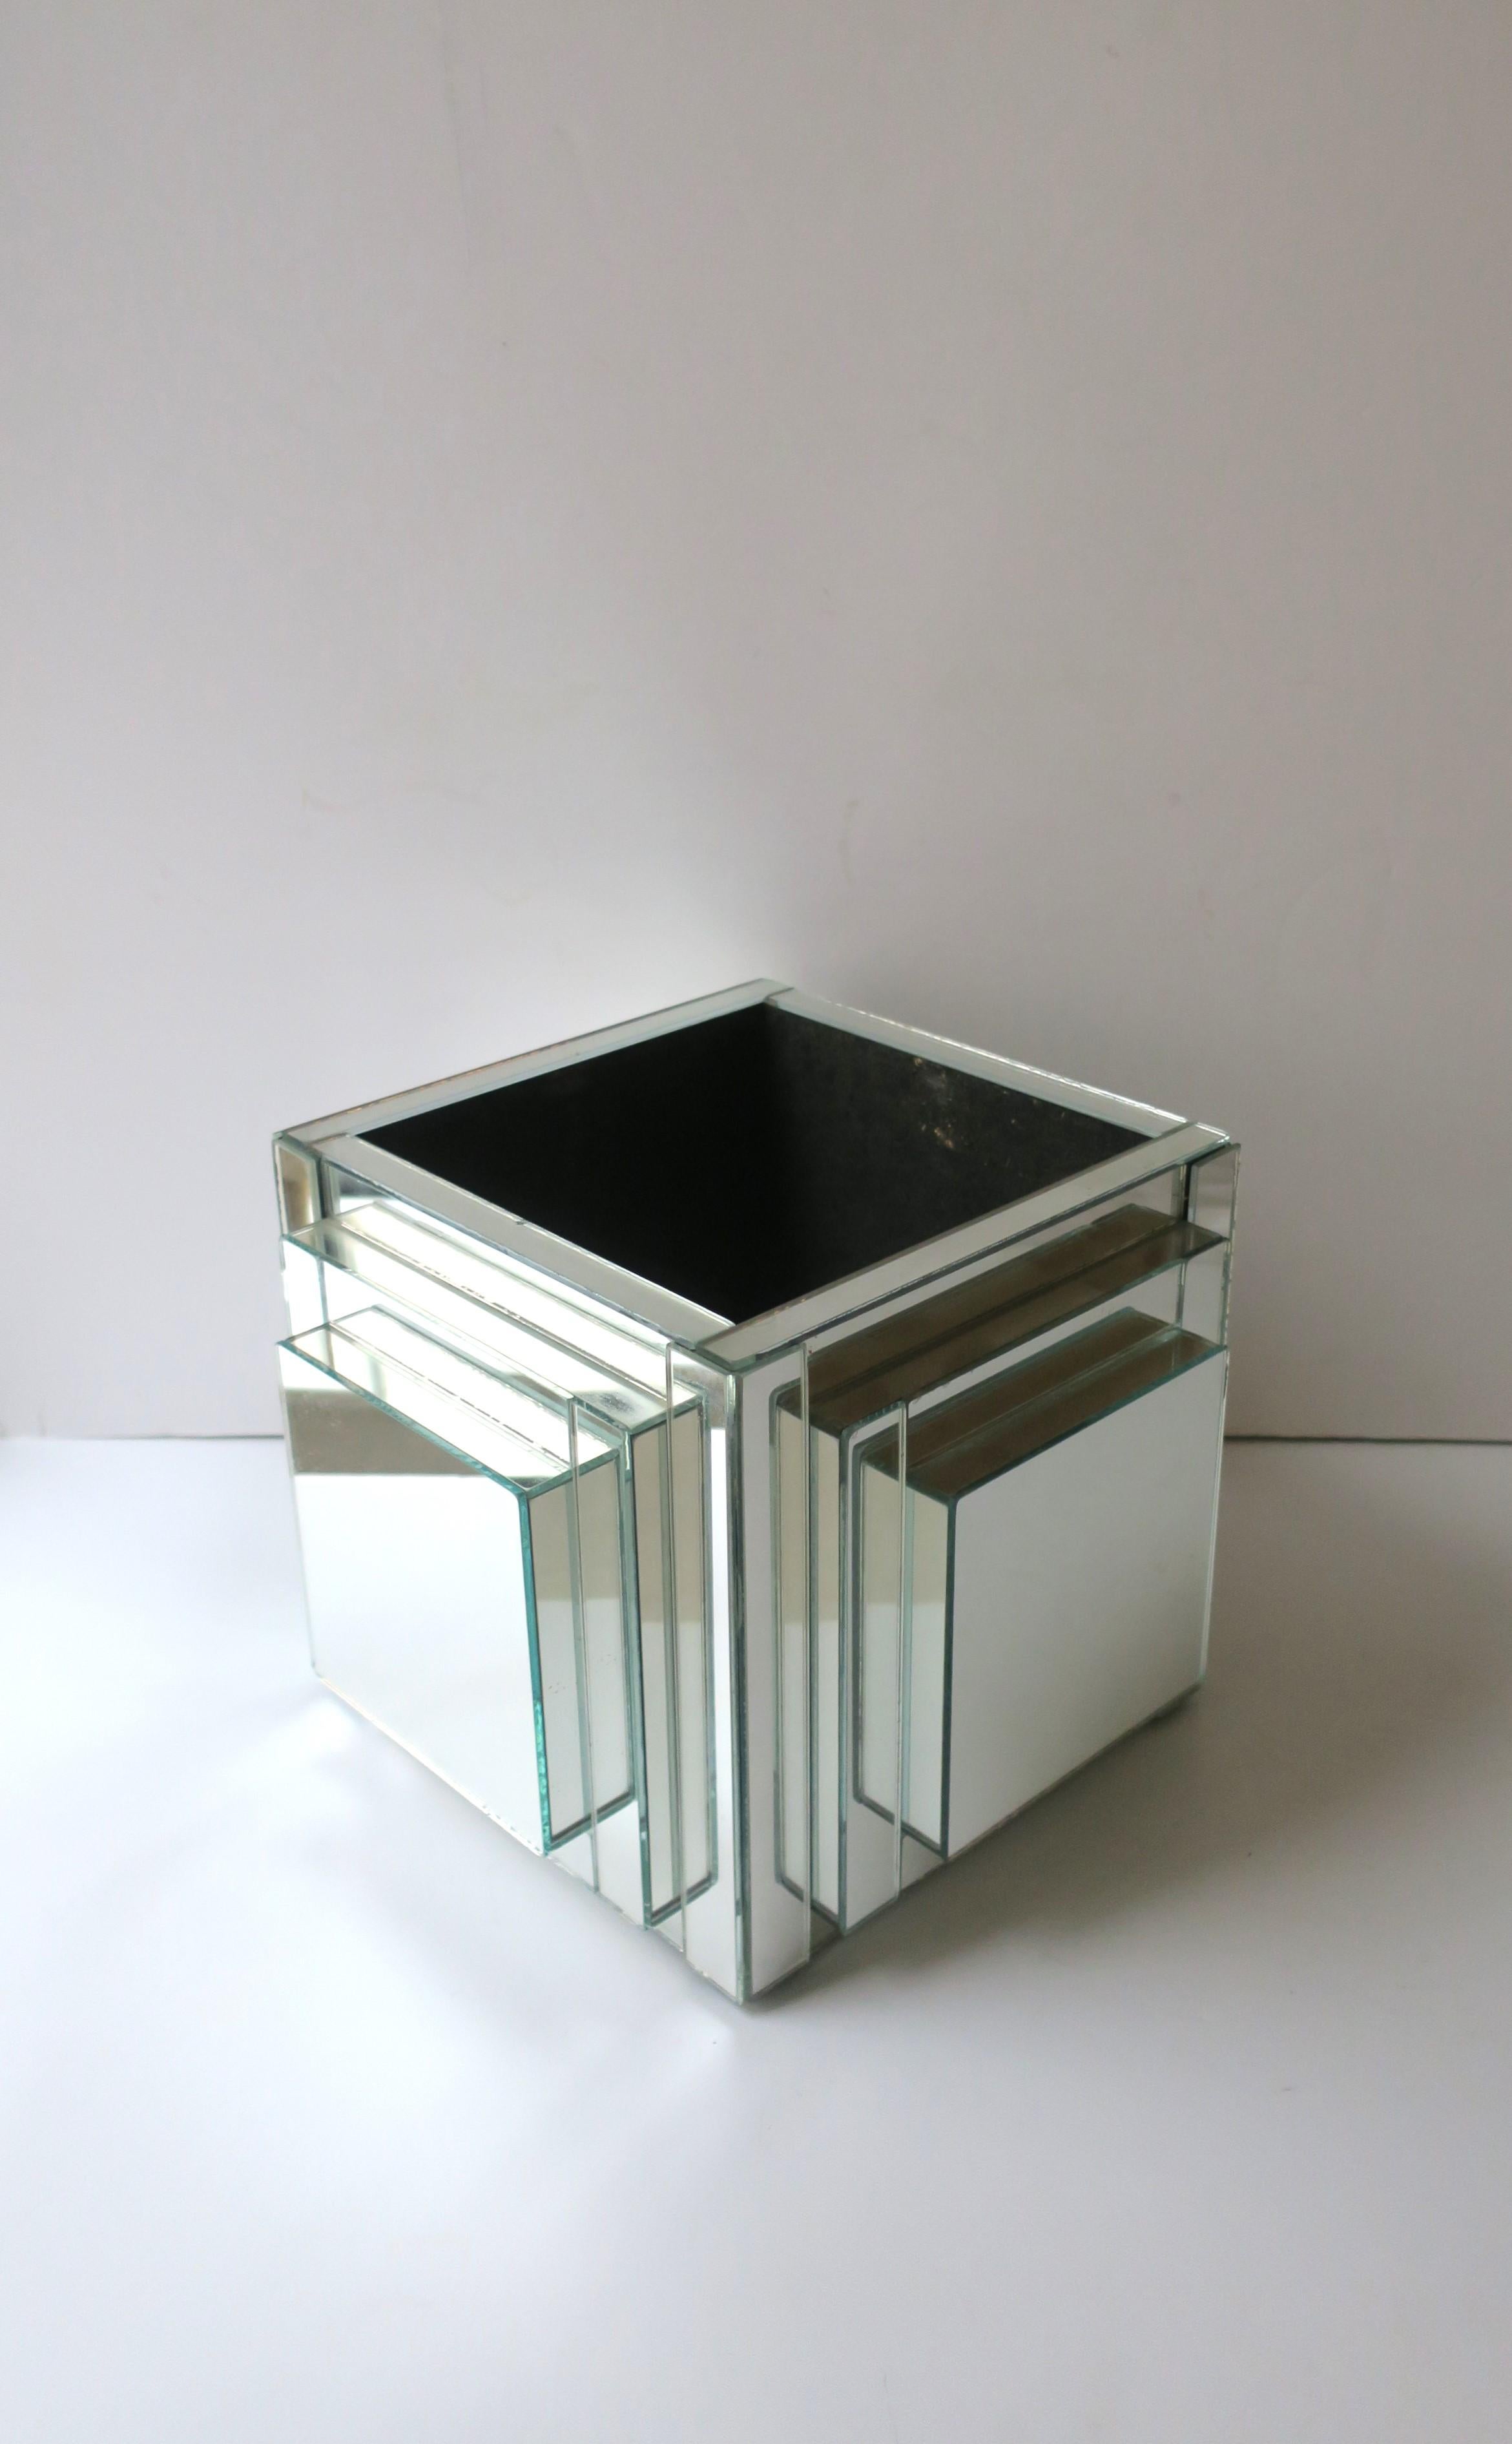 A substantial square mirrored planter cachepot jardinière, '70s Modern/Postmodern period, circa 1970s. A great piece for a plant or flower, low or higher in nature. Piece is strong and can handle a taller plant then which I've shown. A rare find.